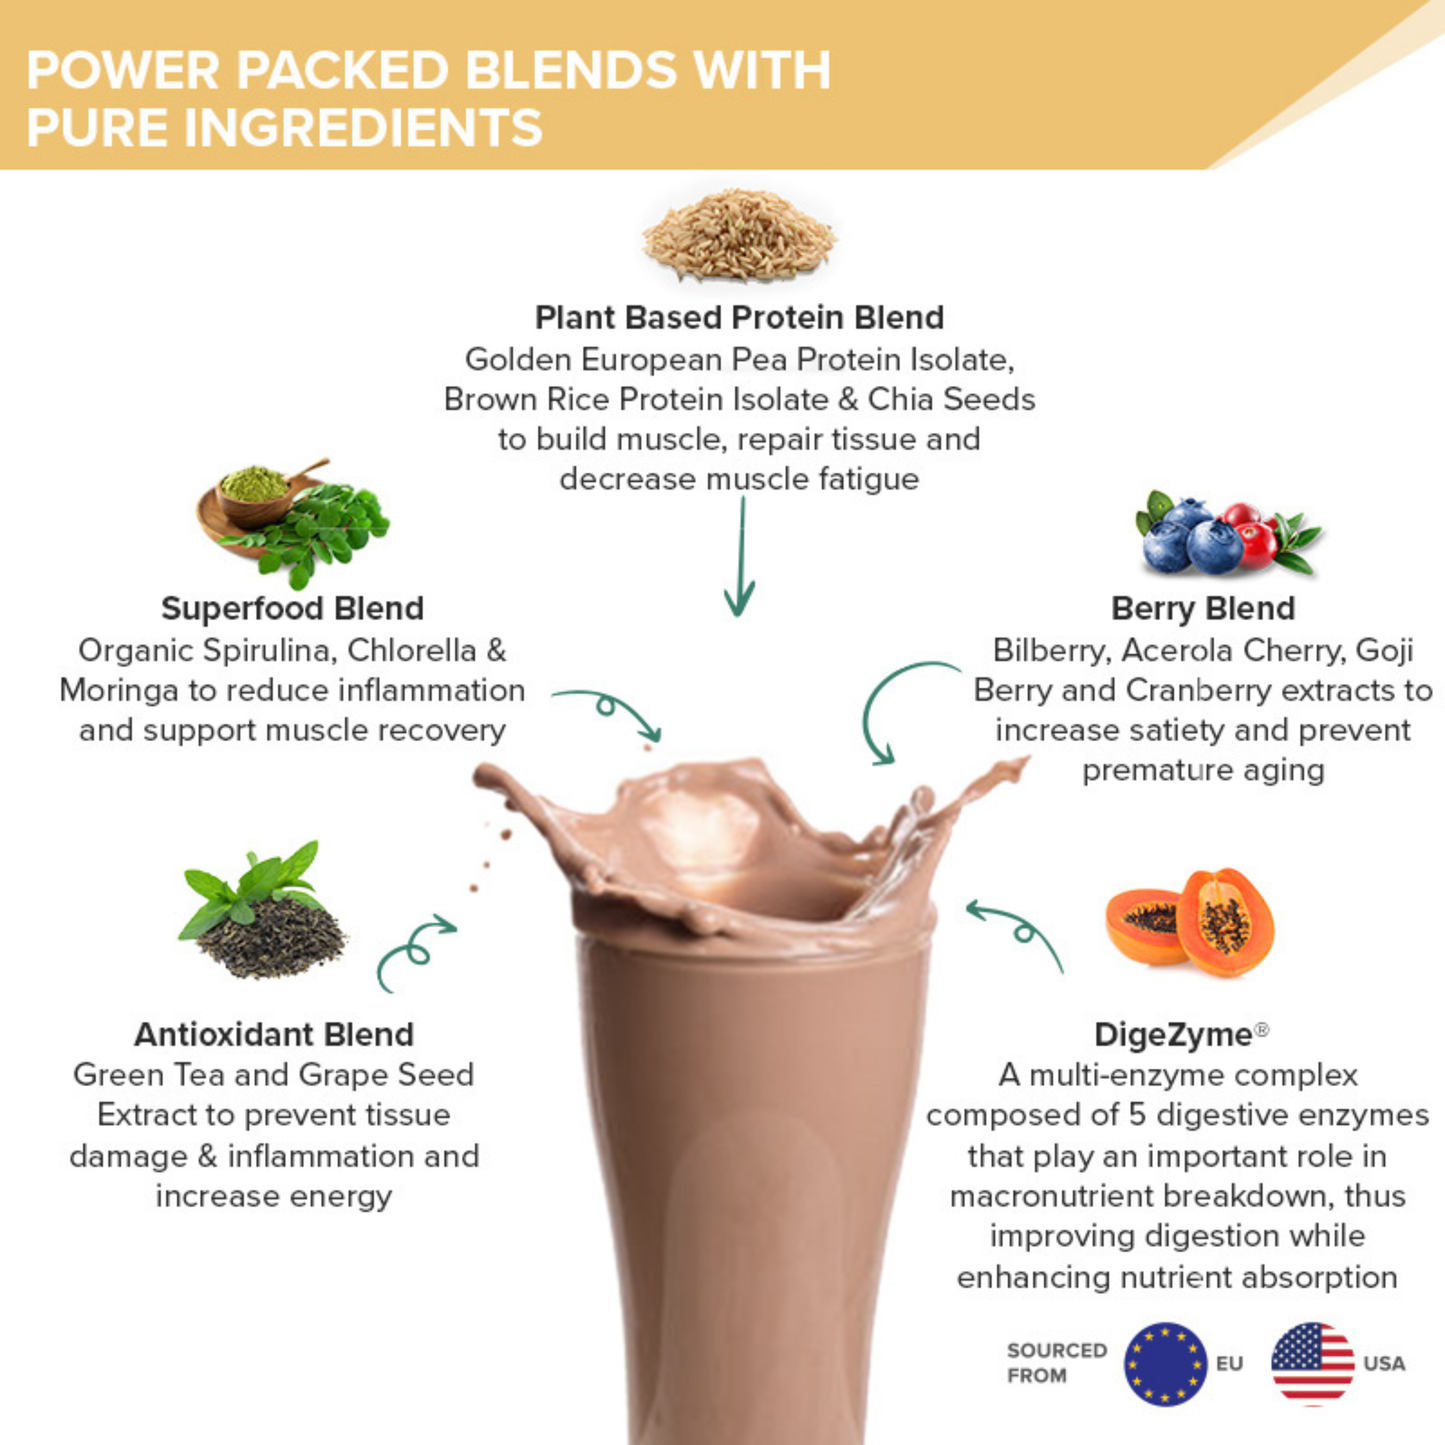 Wellbeing Nutrition Plant Protein Superfood -Italian Cafe Mocha 32gm